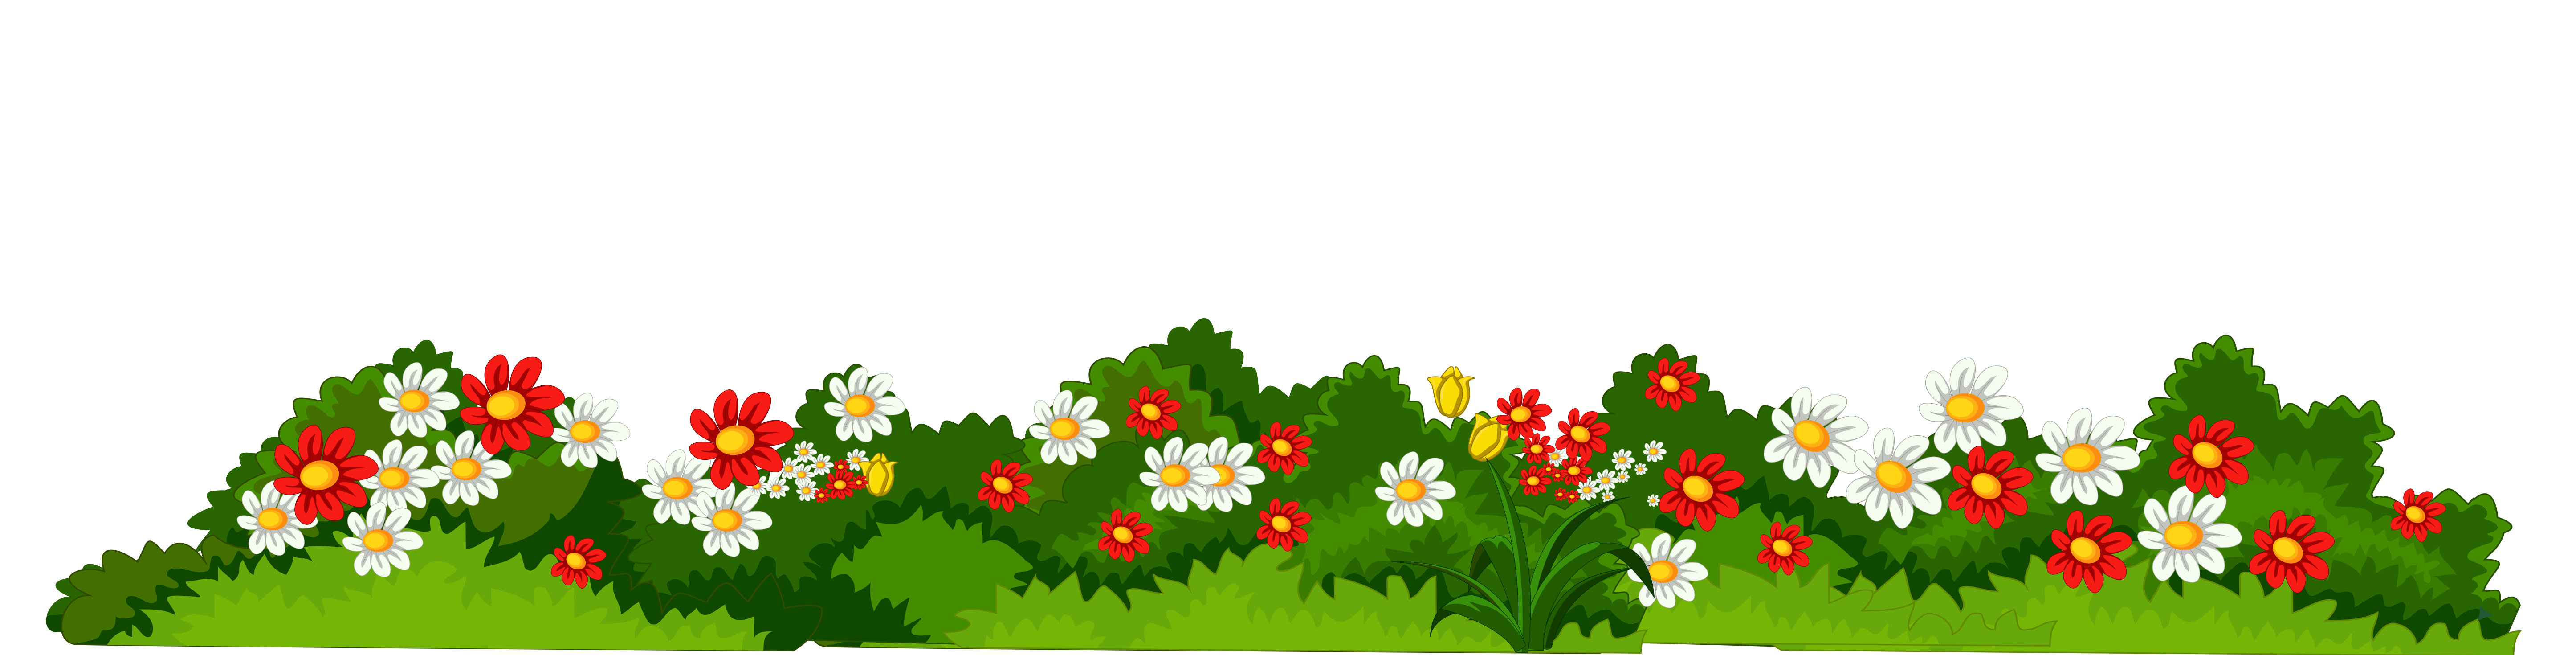 With grass transparent png. Flowers clipart fence